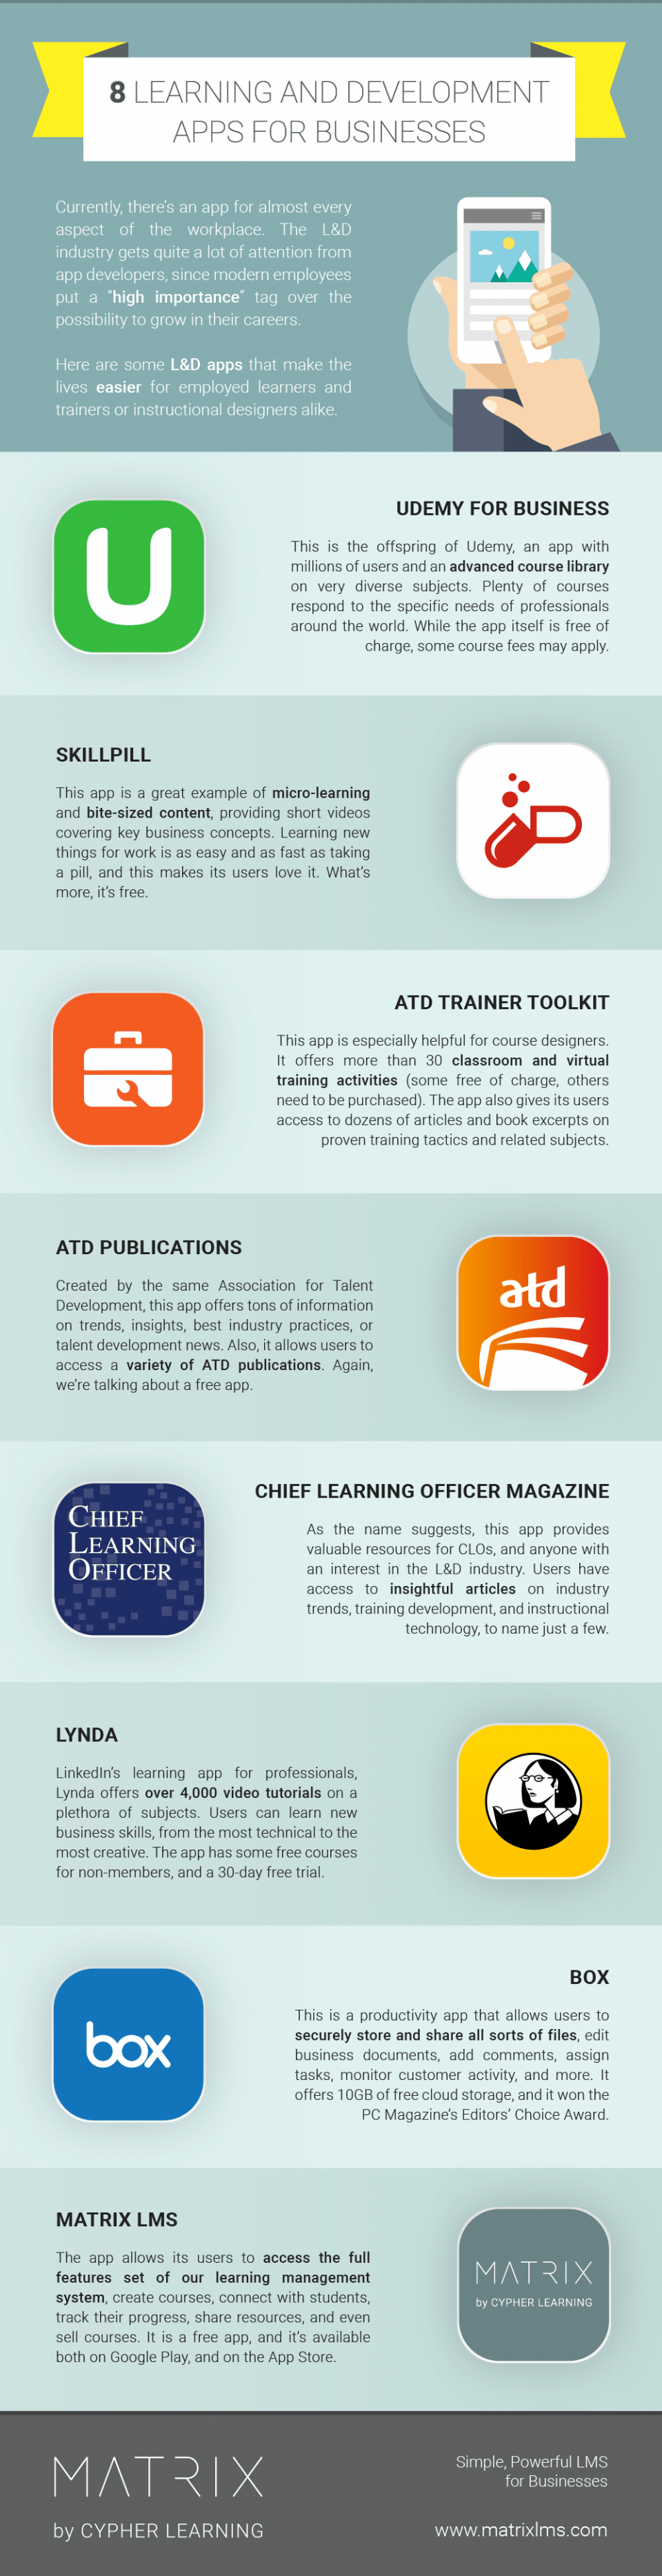 8 Learning and Development Apps for Businesses Infographic